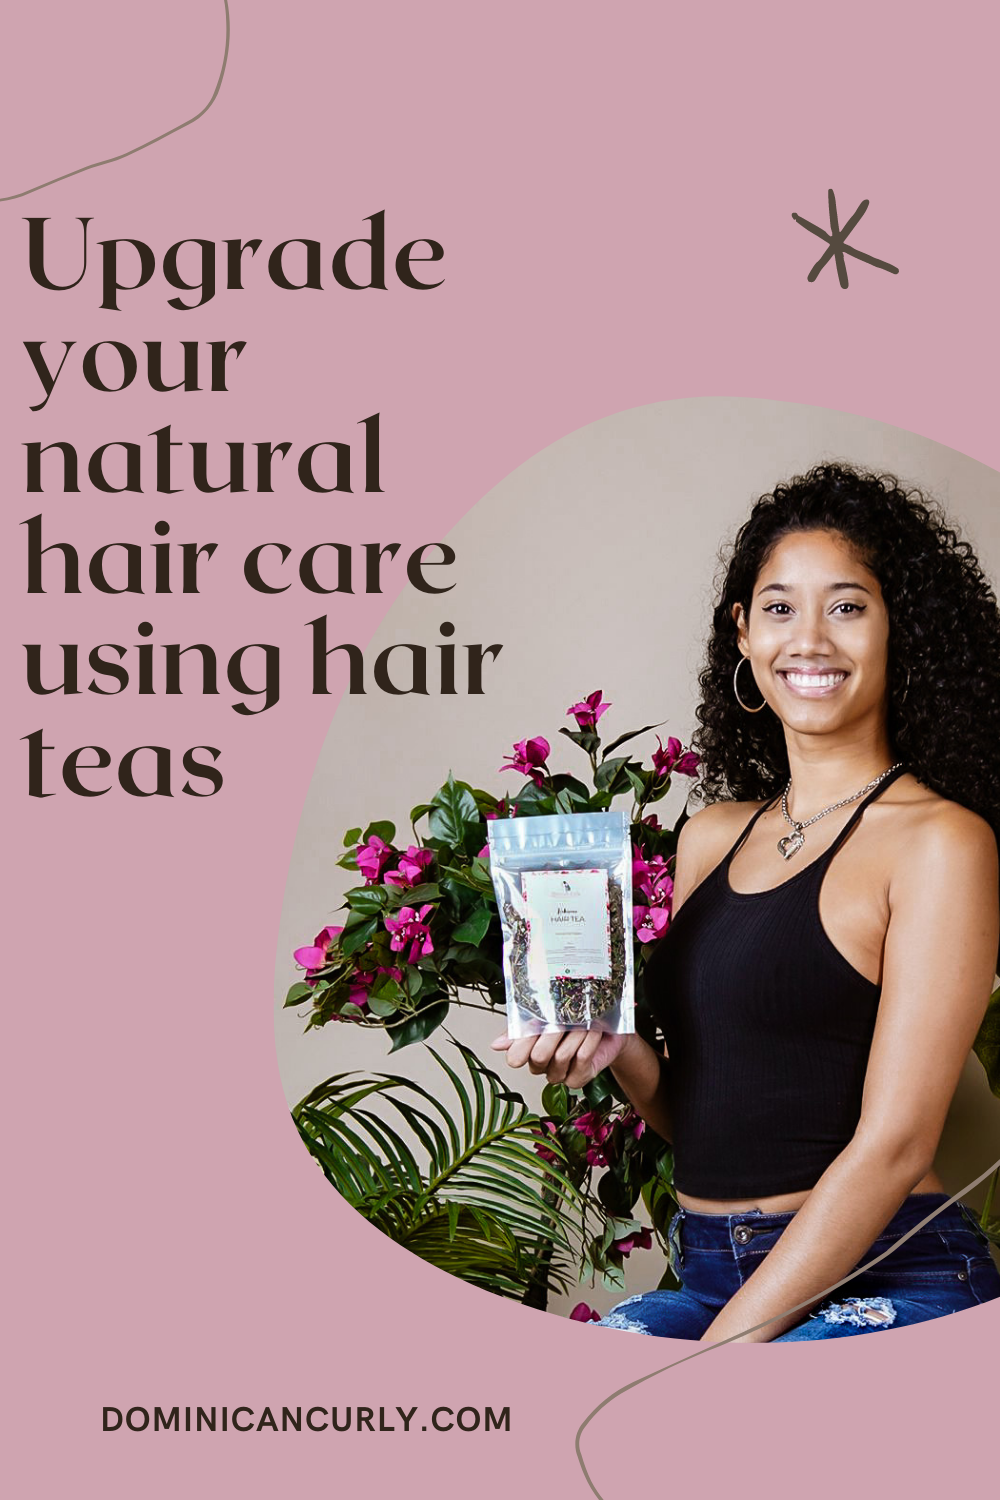 Using Tea To Upgrade Your Natural Hair Care